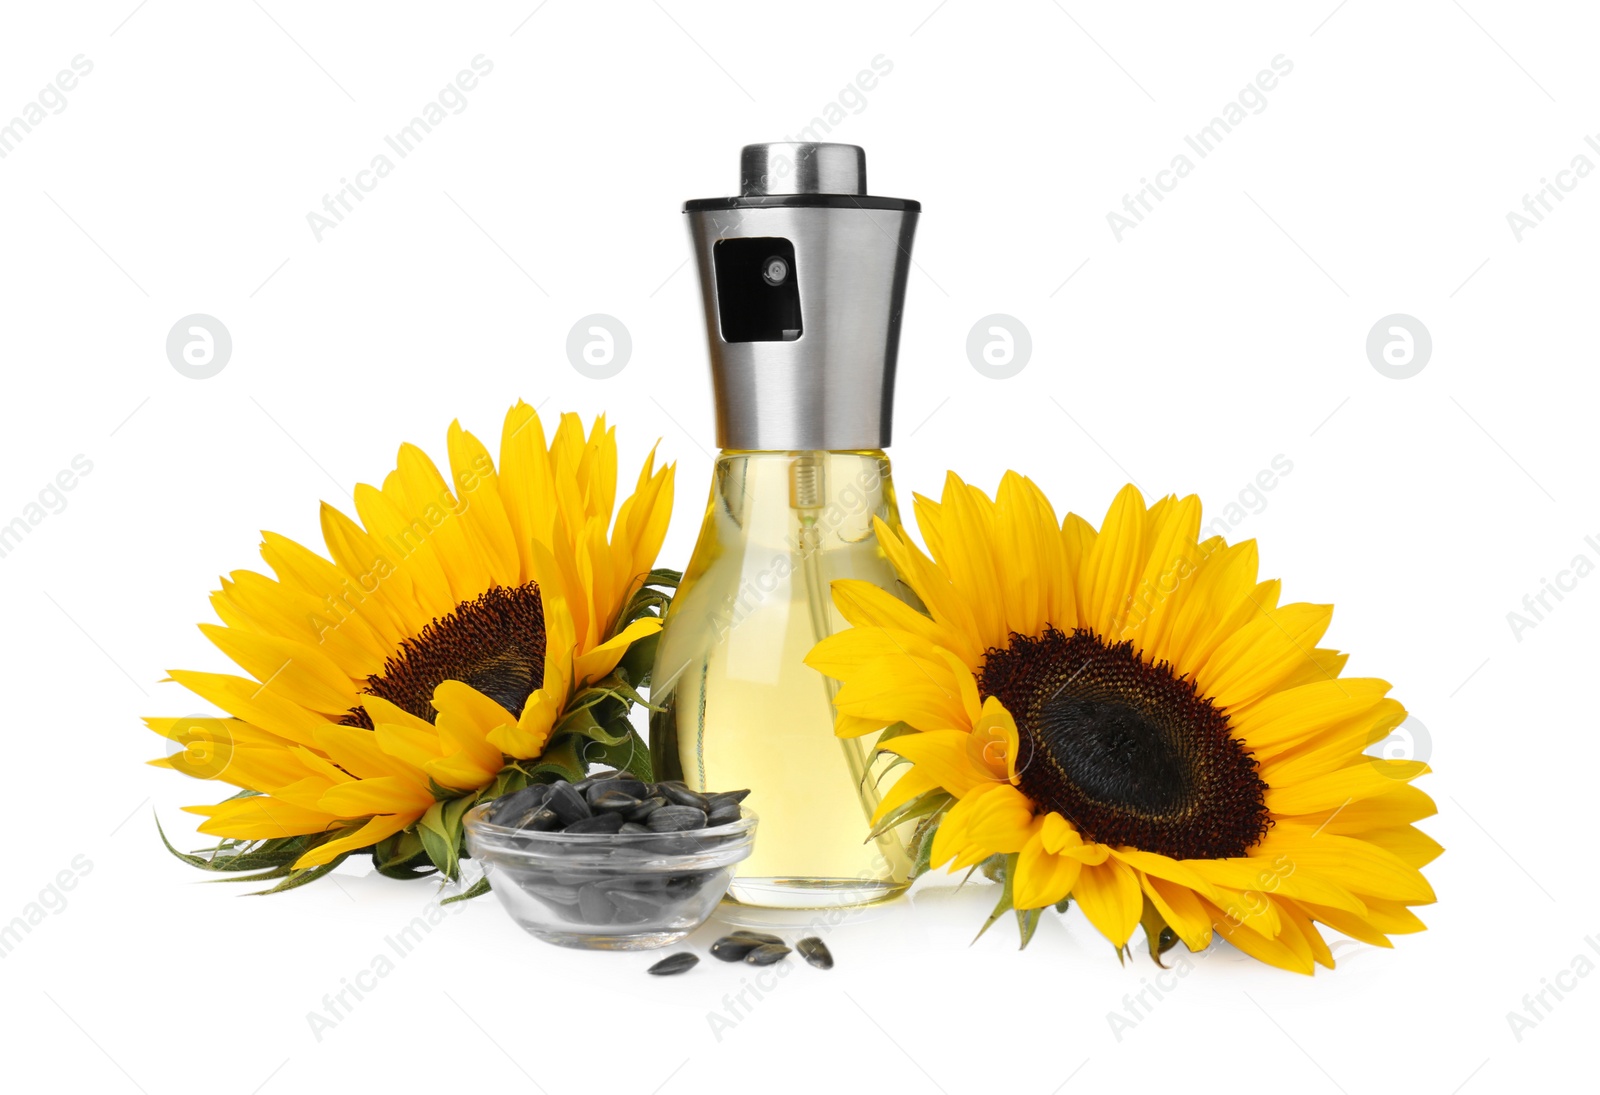 Photo of Spray bottle with cooking oil, sunflowers and seeds on white background